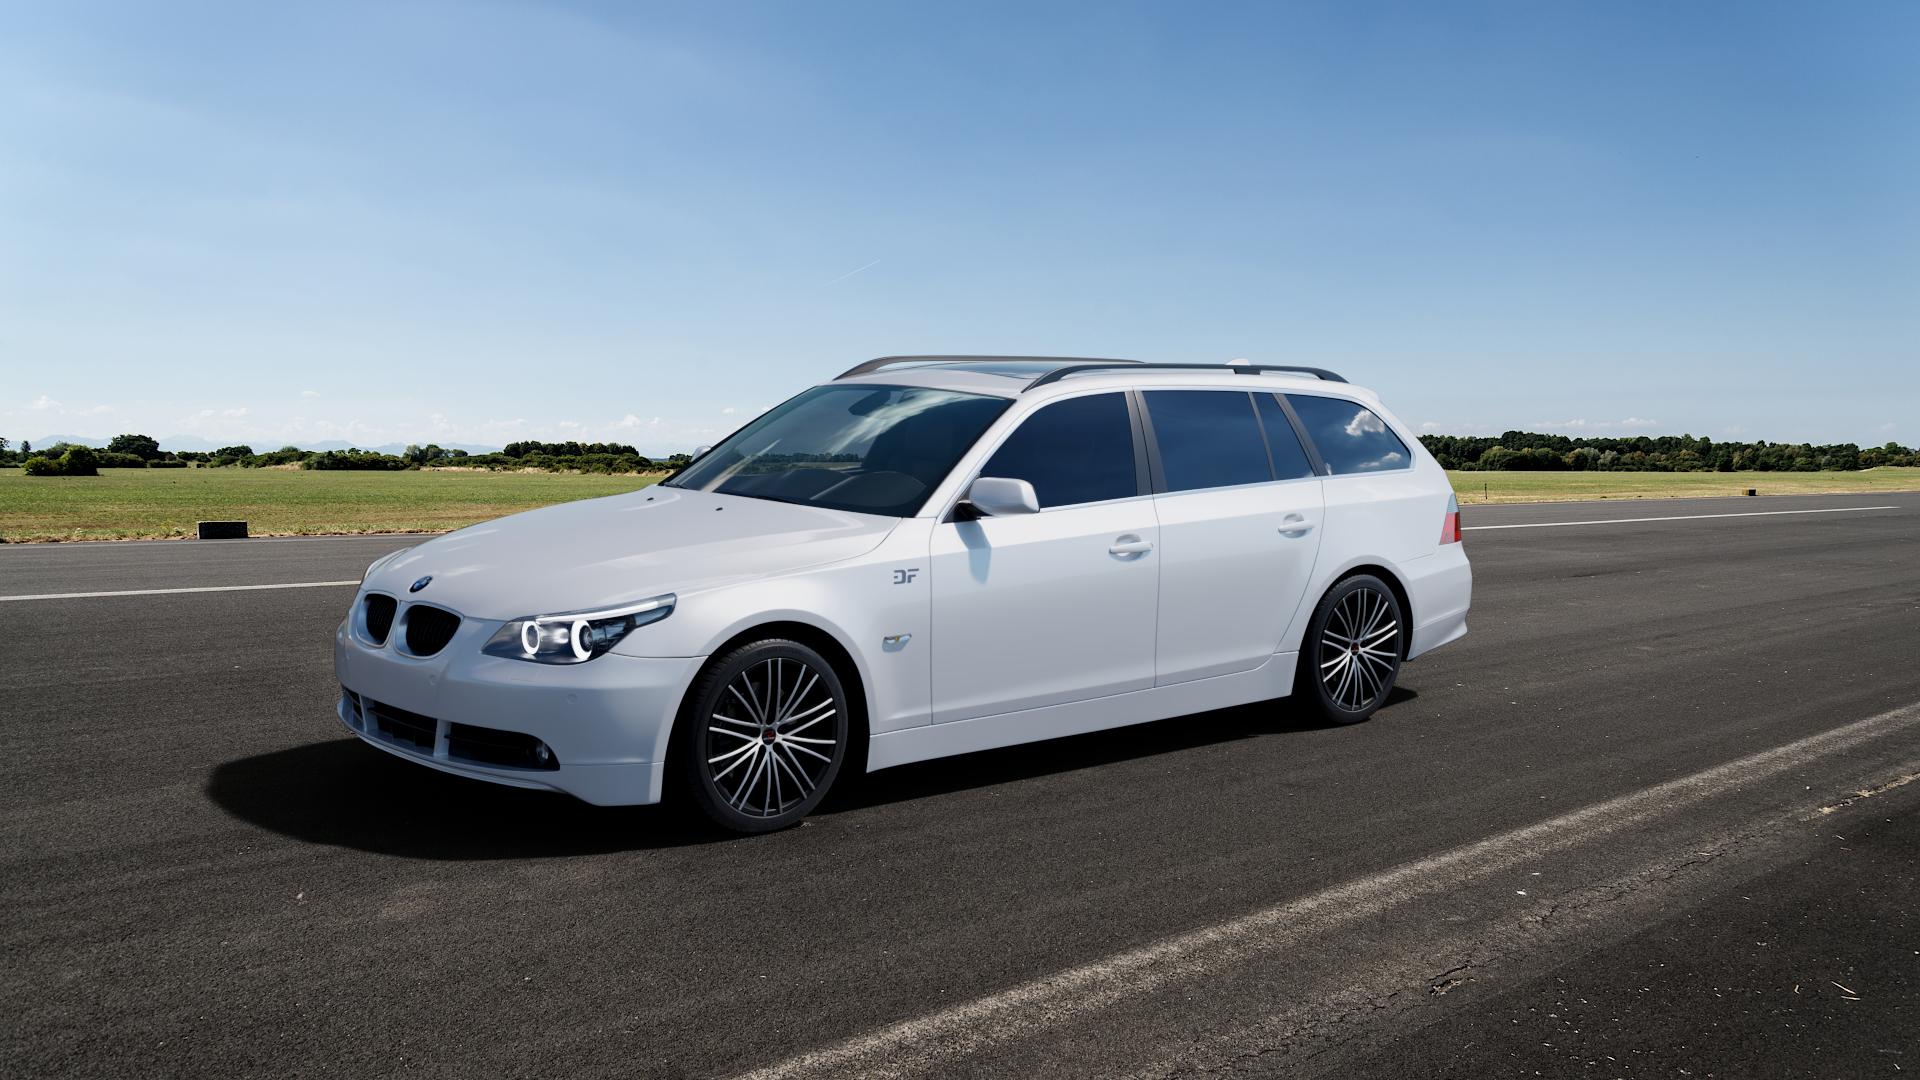 BMW 530xd Type E61 (Touring) 3,0l D 170kW (231 hp) Wheels and Tyre Packages  | velonity.com